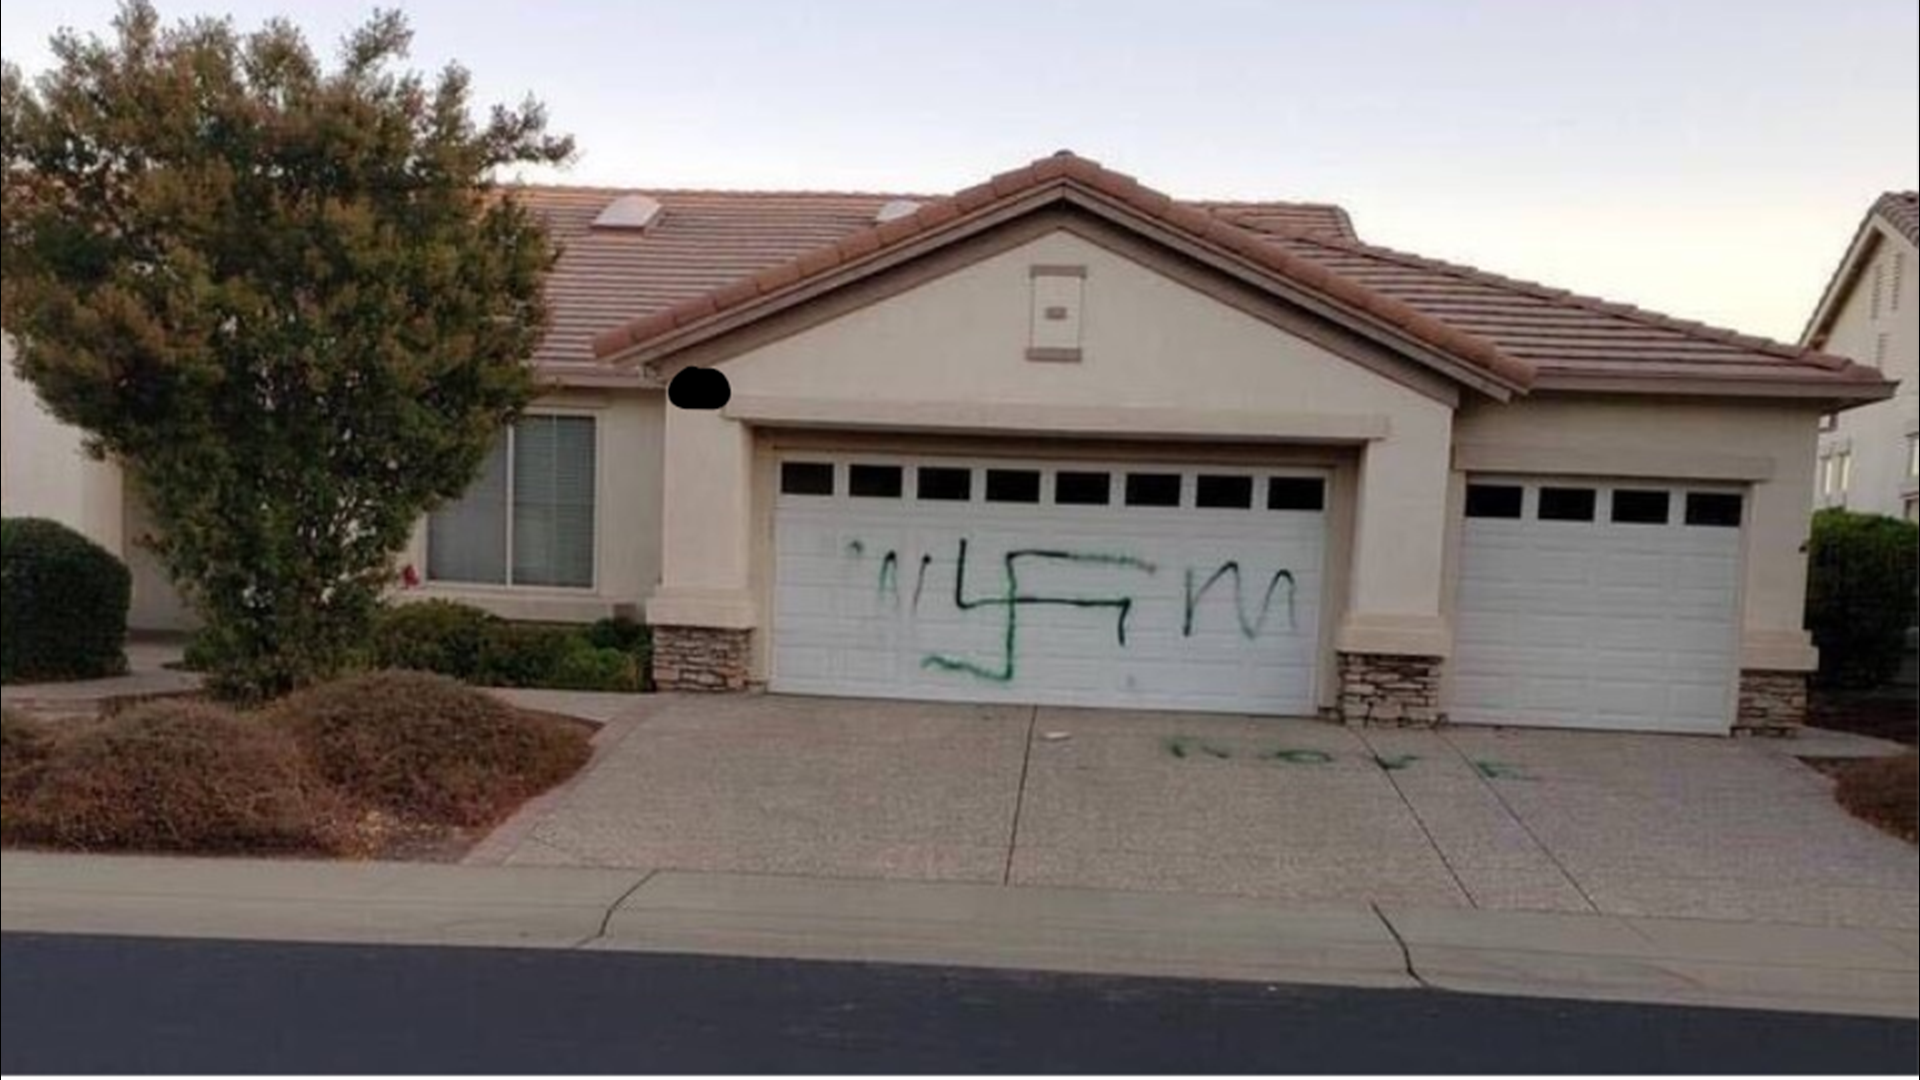 Police are investigating after two garage doors in a Lincoln neighborhood were spray painted. Neighbors believe the vandalism was politically motivated.